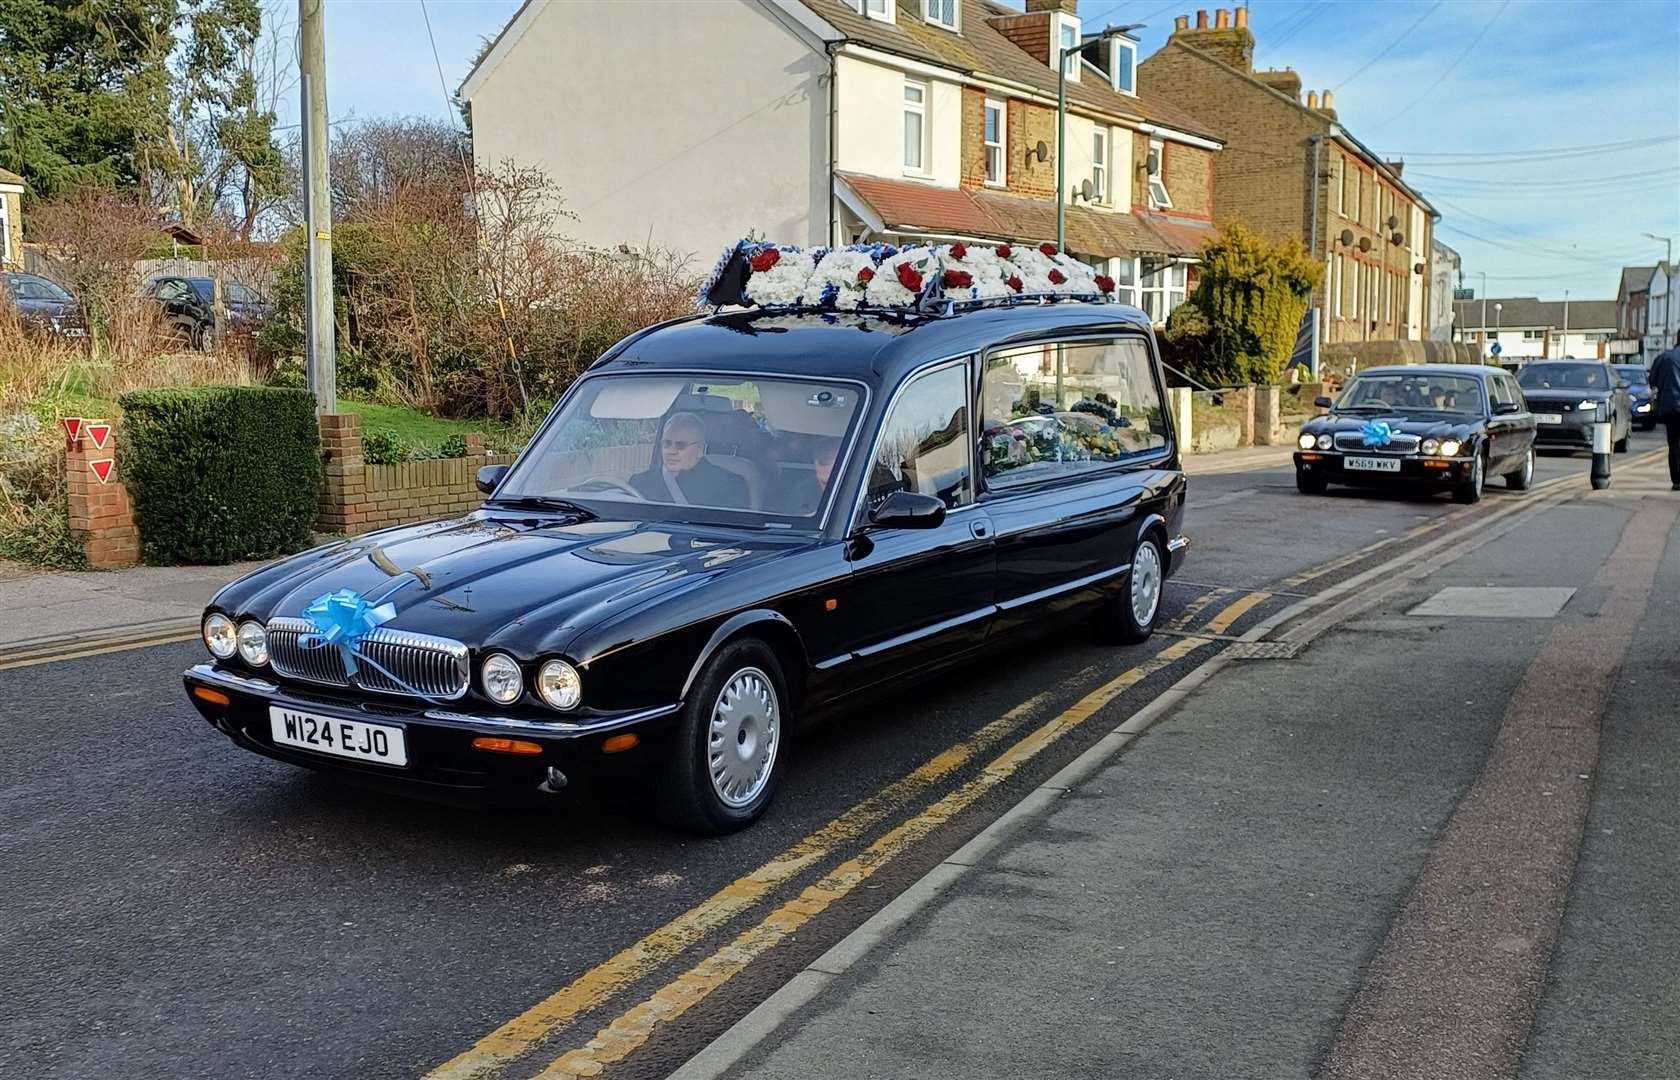 The funeral procession went through Hoo and Stoke earlier today